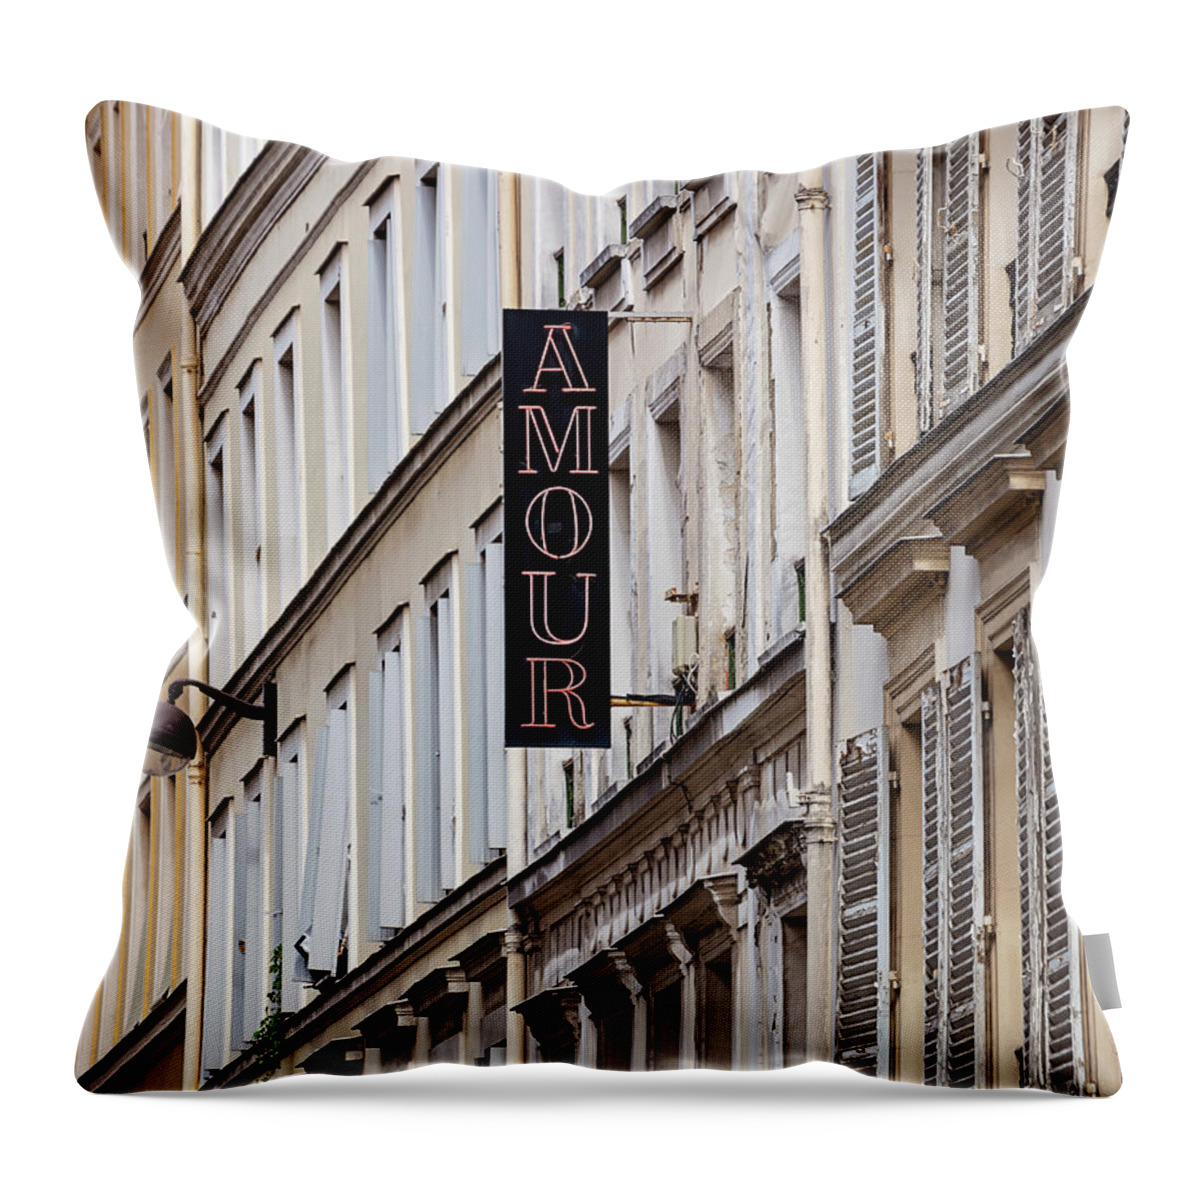 Amour Throw Pillow featuring the photograph Paris Amour by Melanie Alexandra Price